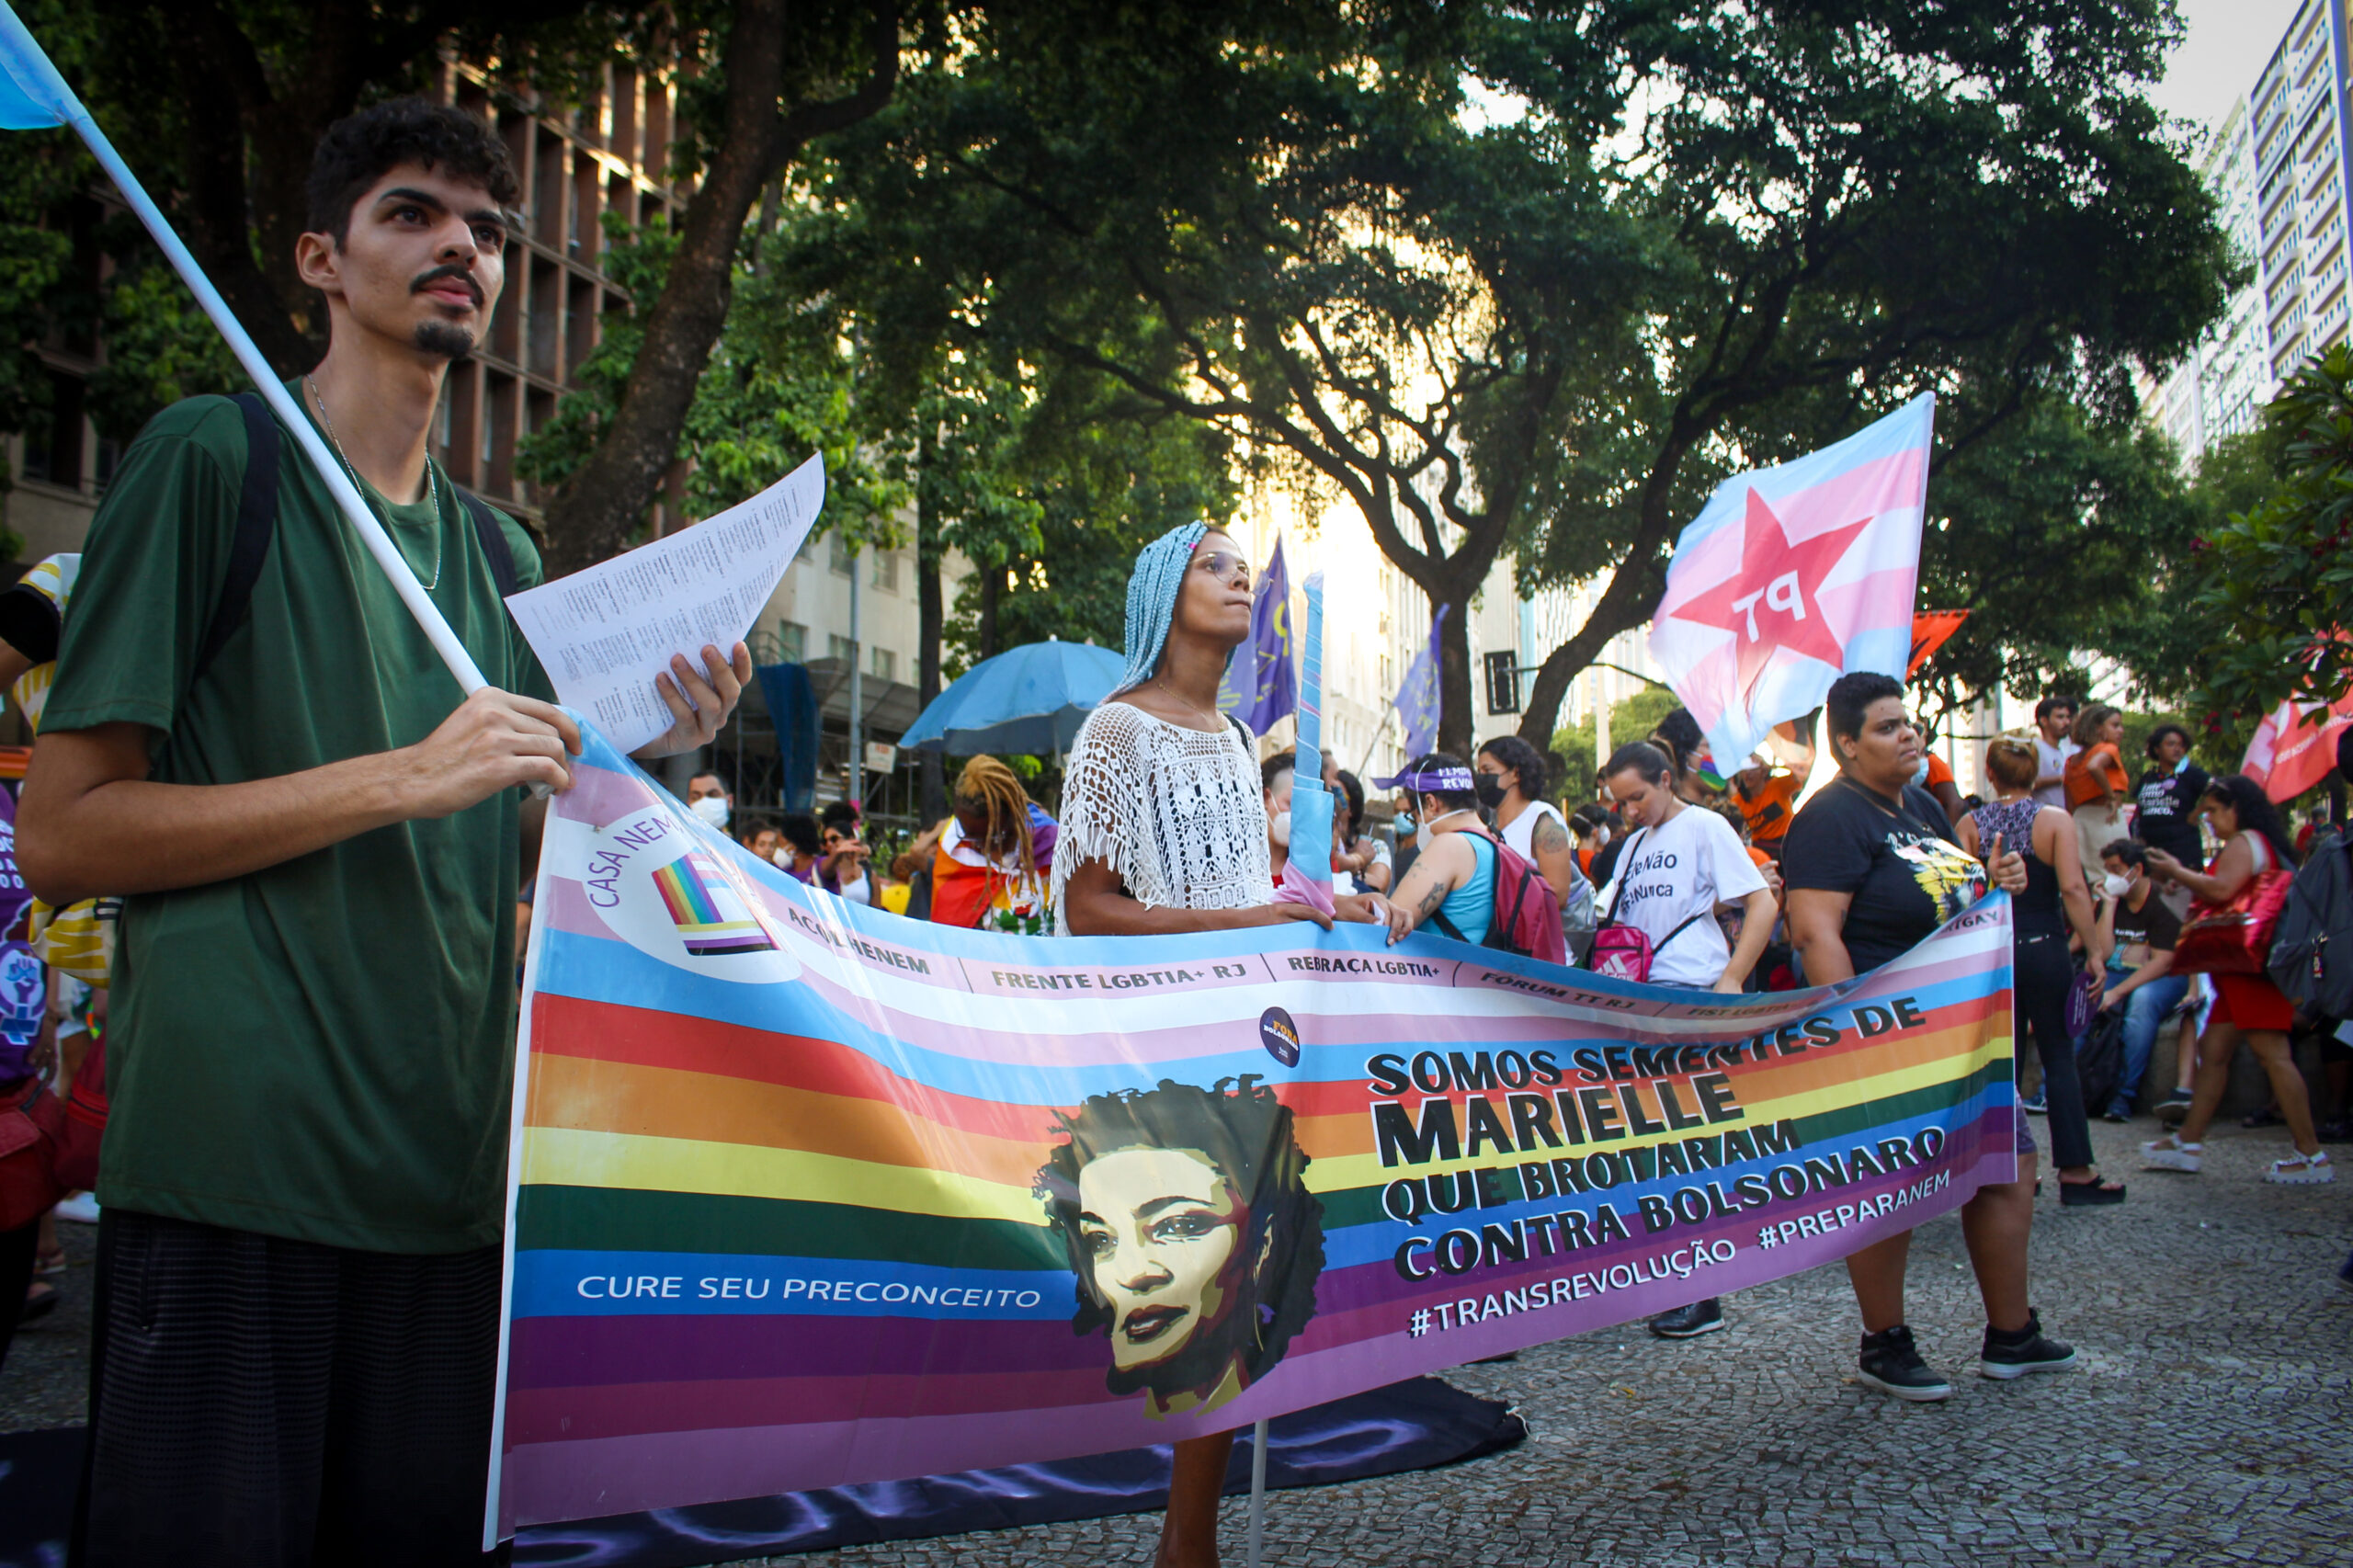 This month, it'll be four years since Councilor Marielle Franco was murdered. Photo: Jaqueline Suarez